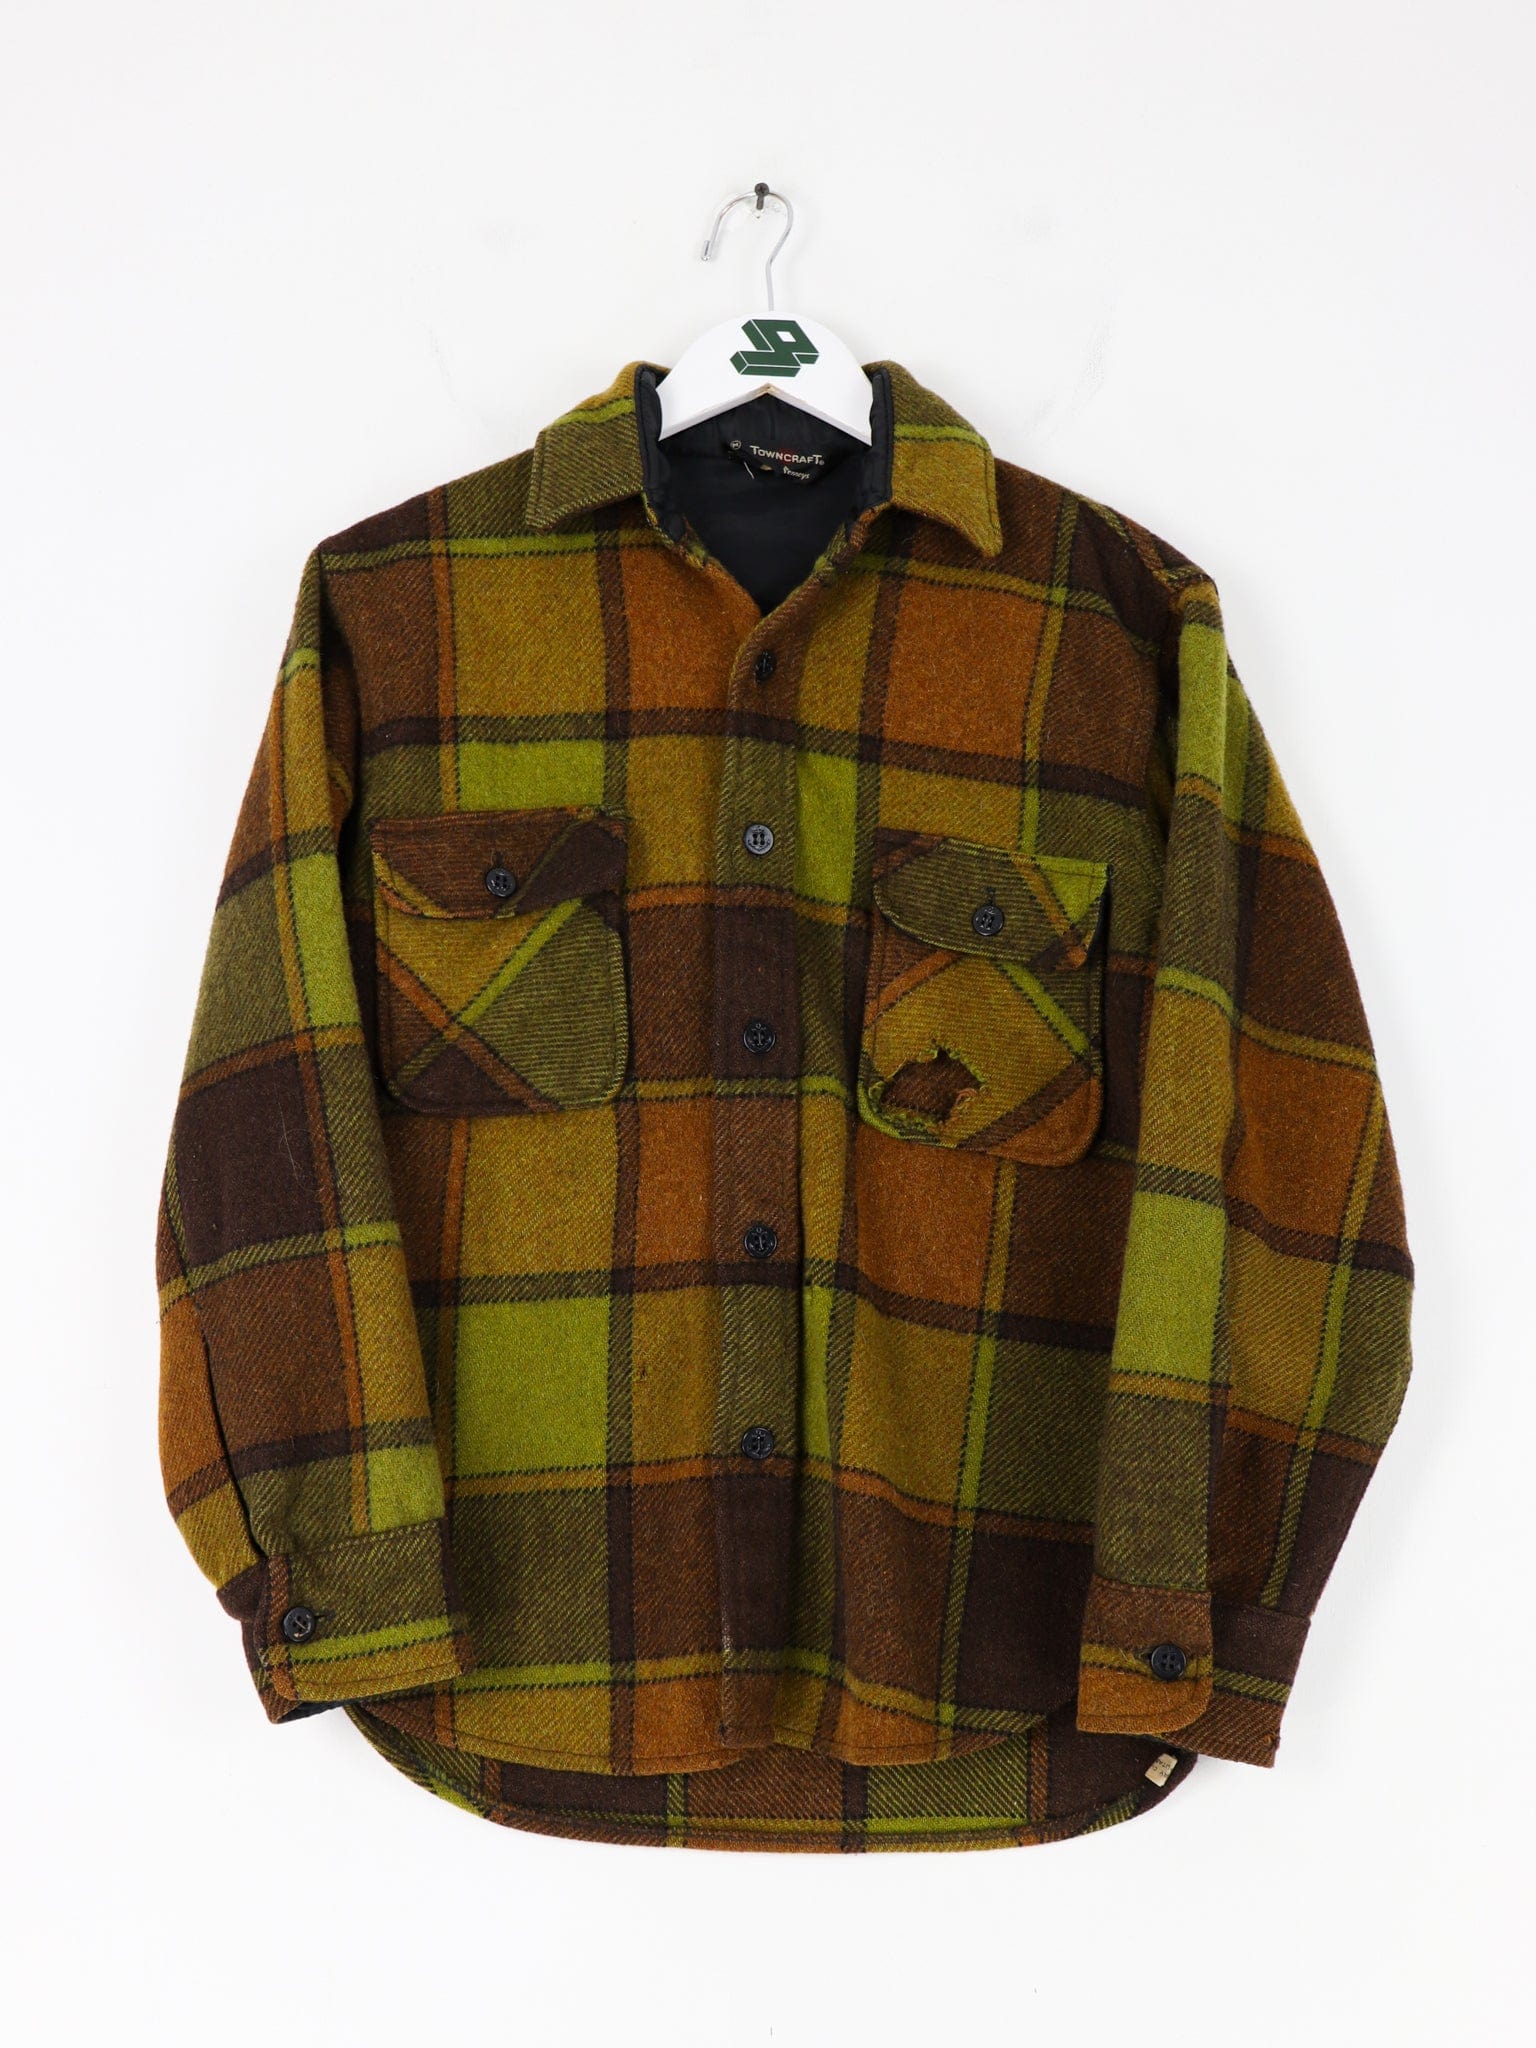 Vintage 80s Towncraft Wool Blend Flannel Shirt Size Medium Fits Small